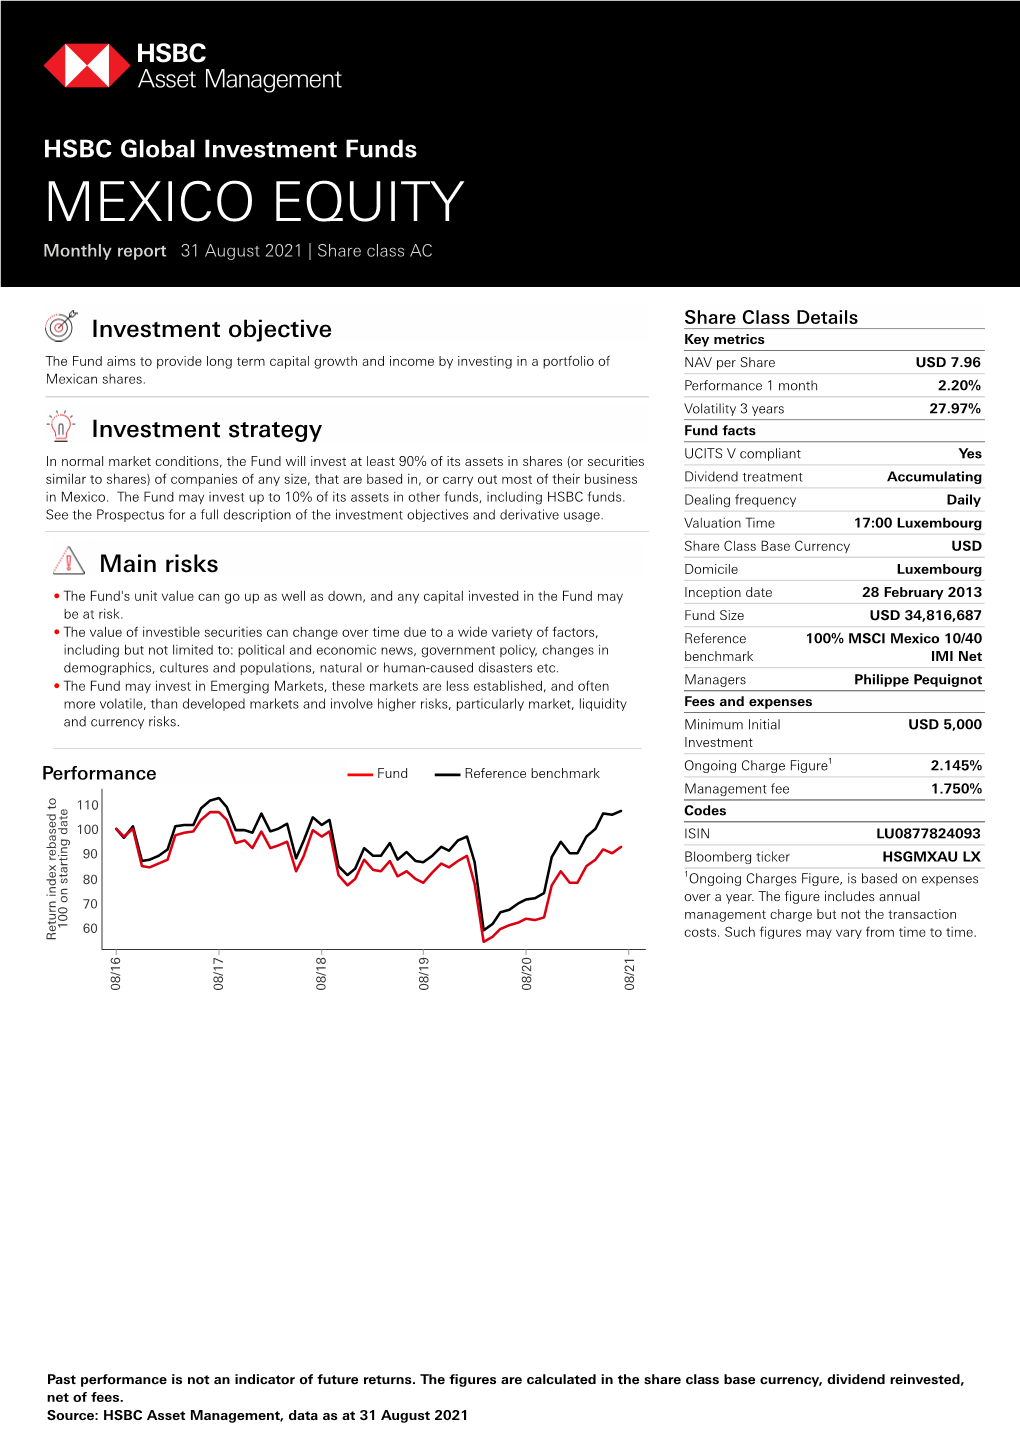 HSBC Global Investment Funds MEXICO EQUITY Monthly Report 31 August 2021 | Share Class AC